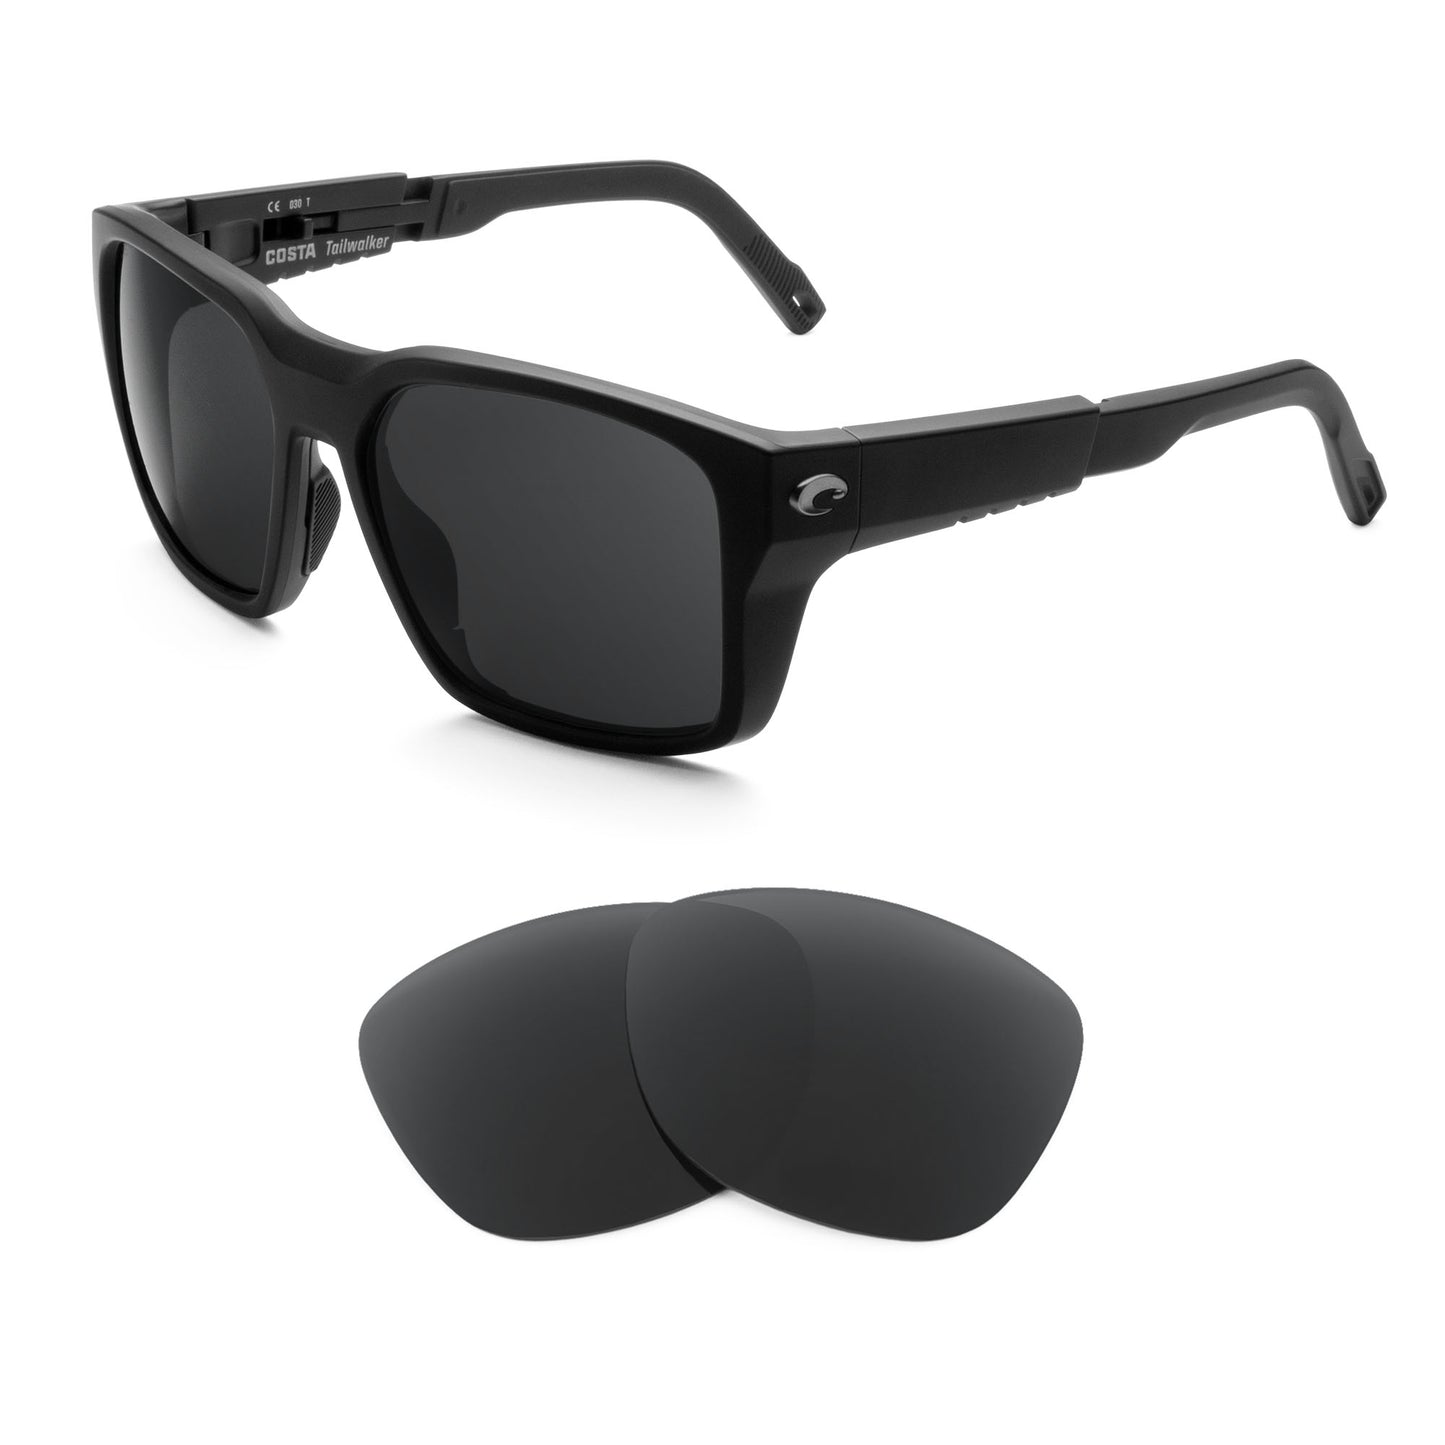 Costa Tailwalker sunglasses with replacement lenses